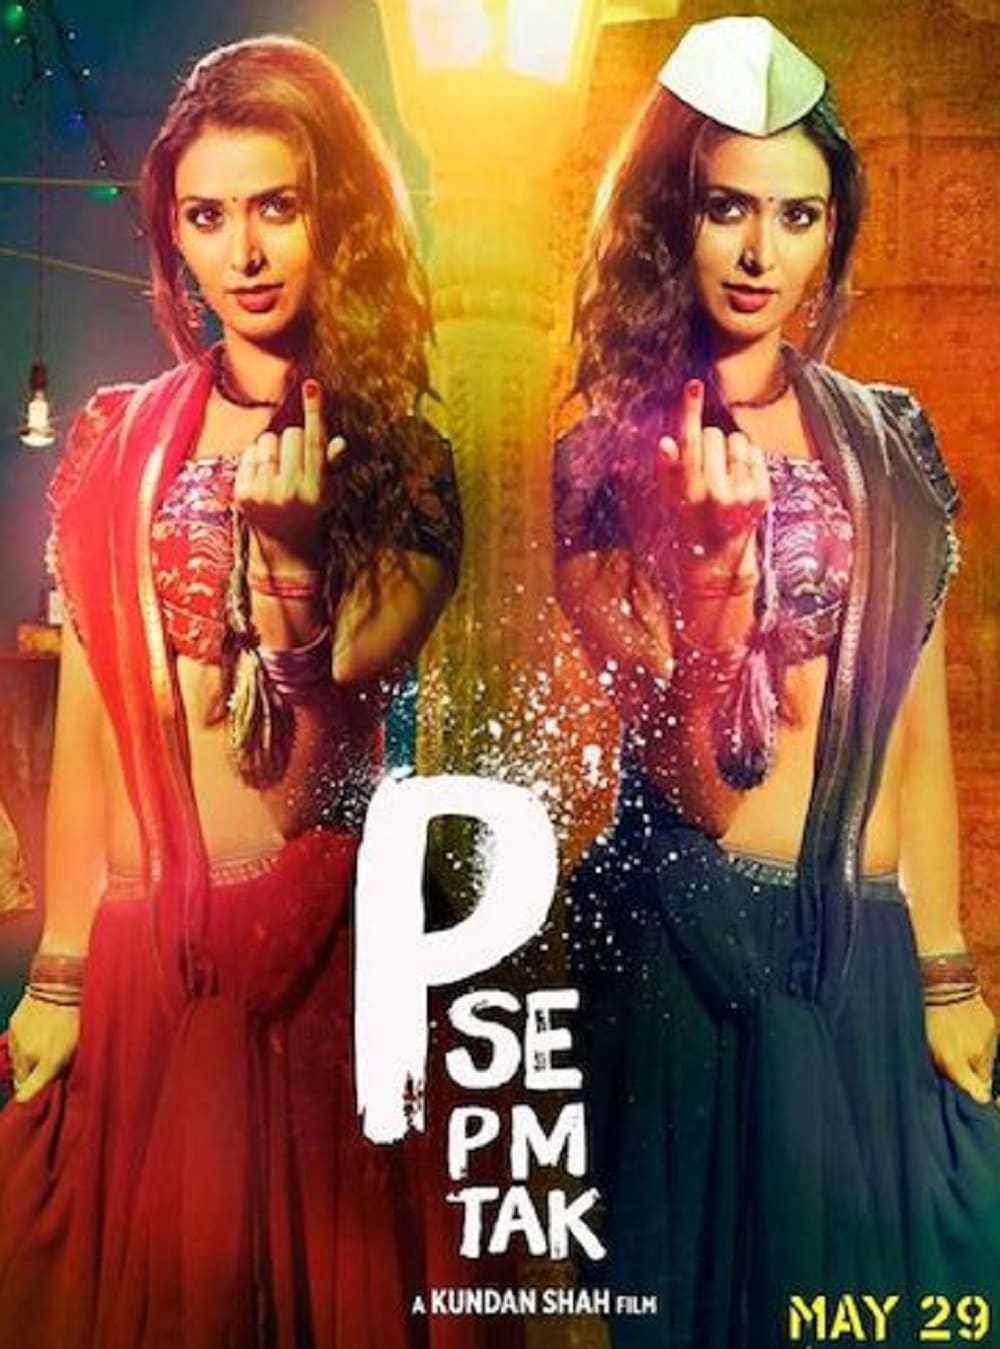 Poster for the movie "P Se PM Tak"